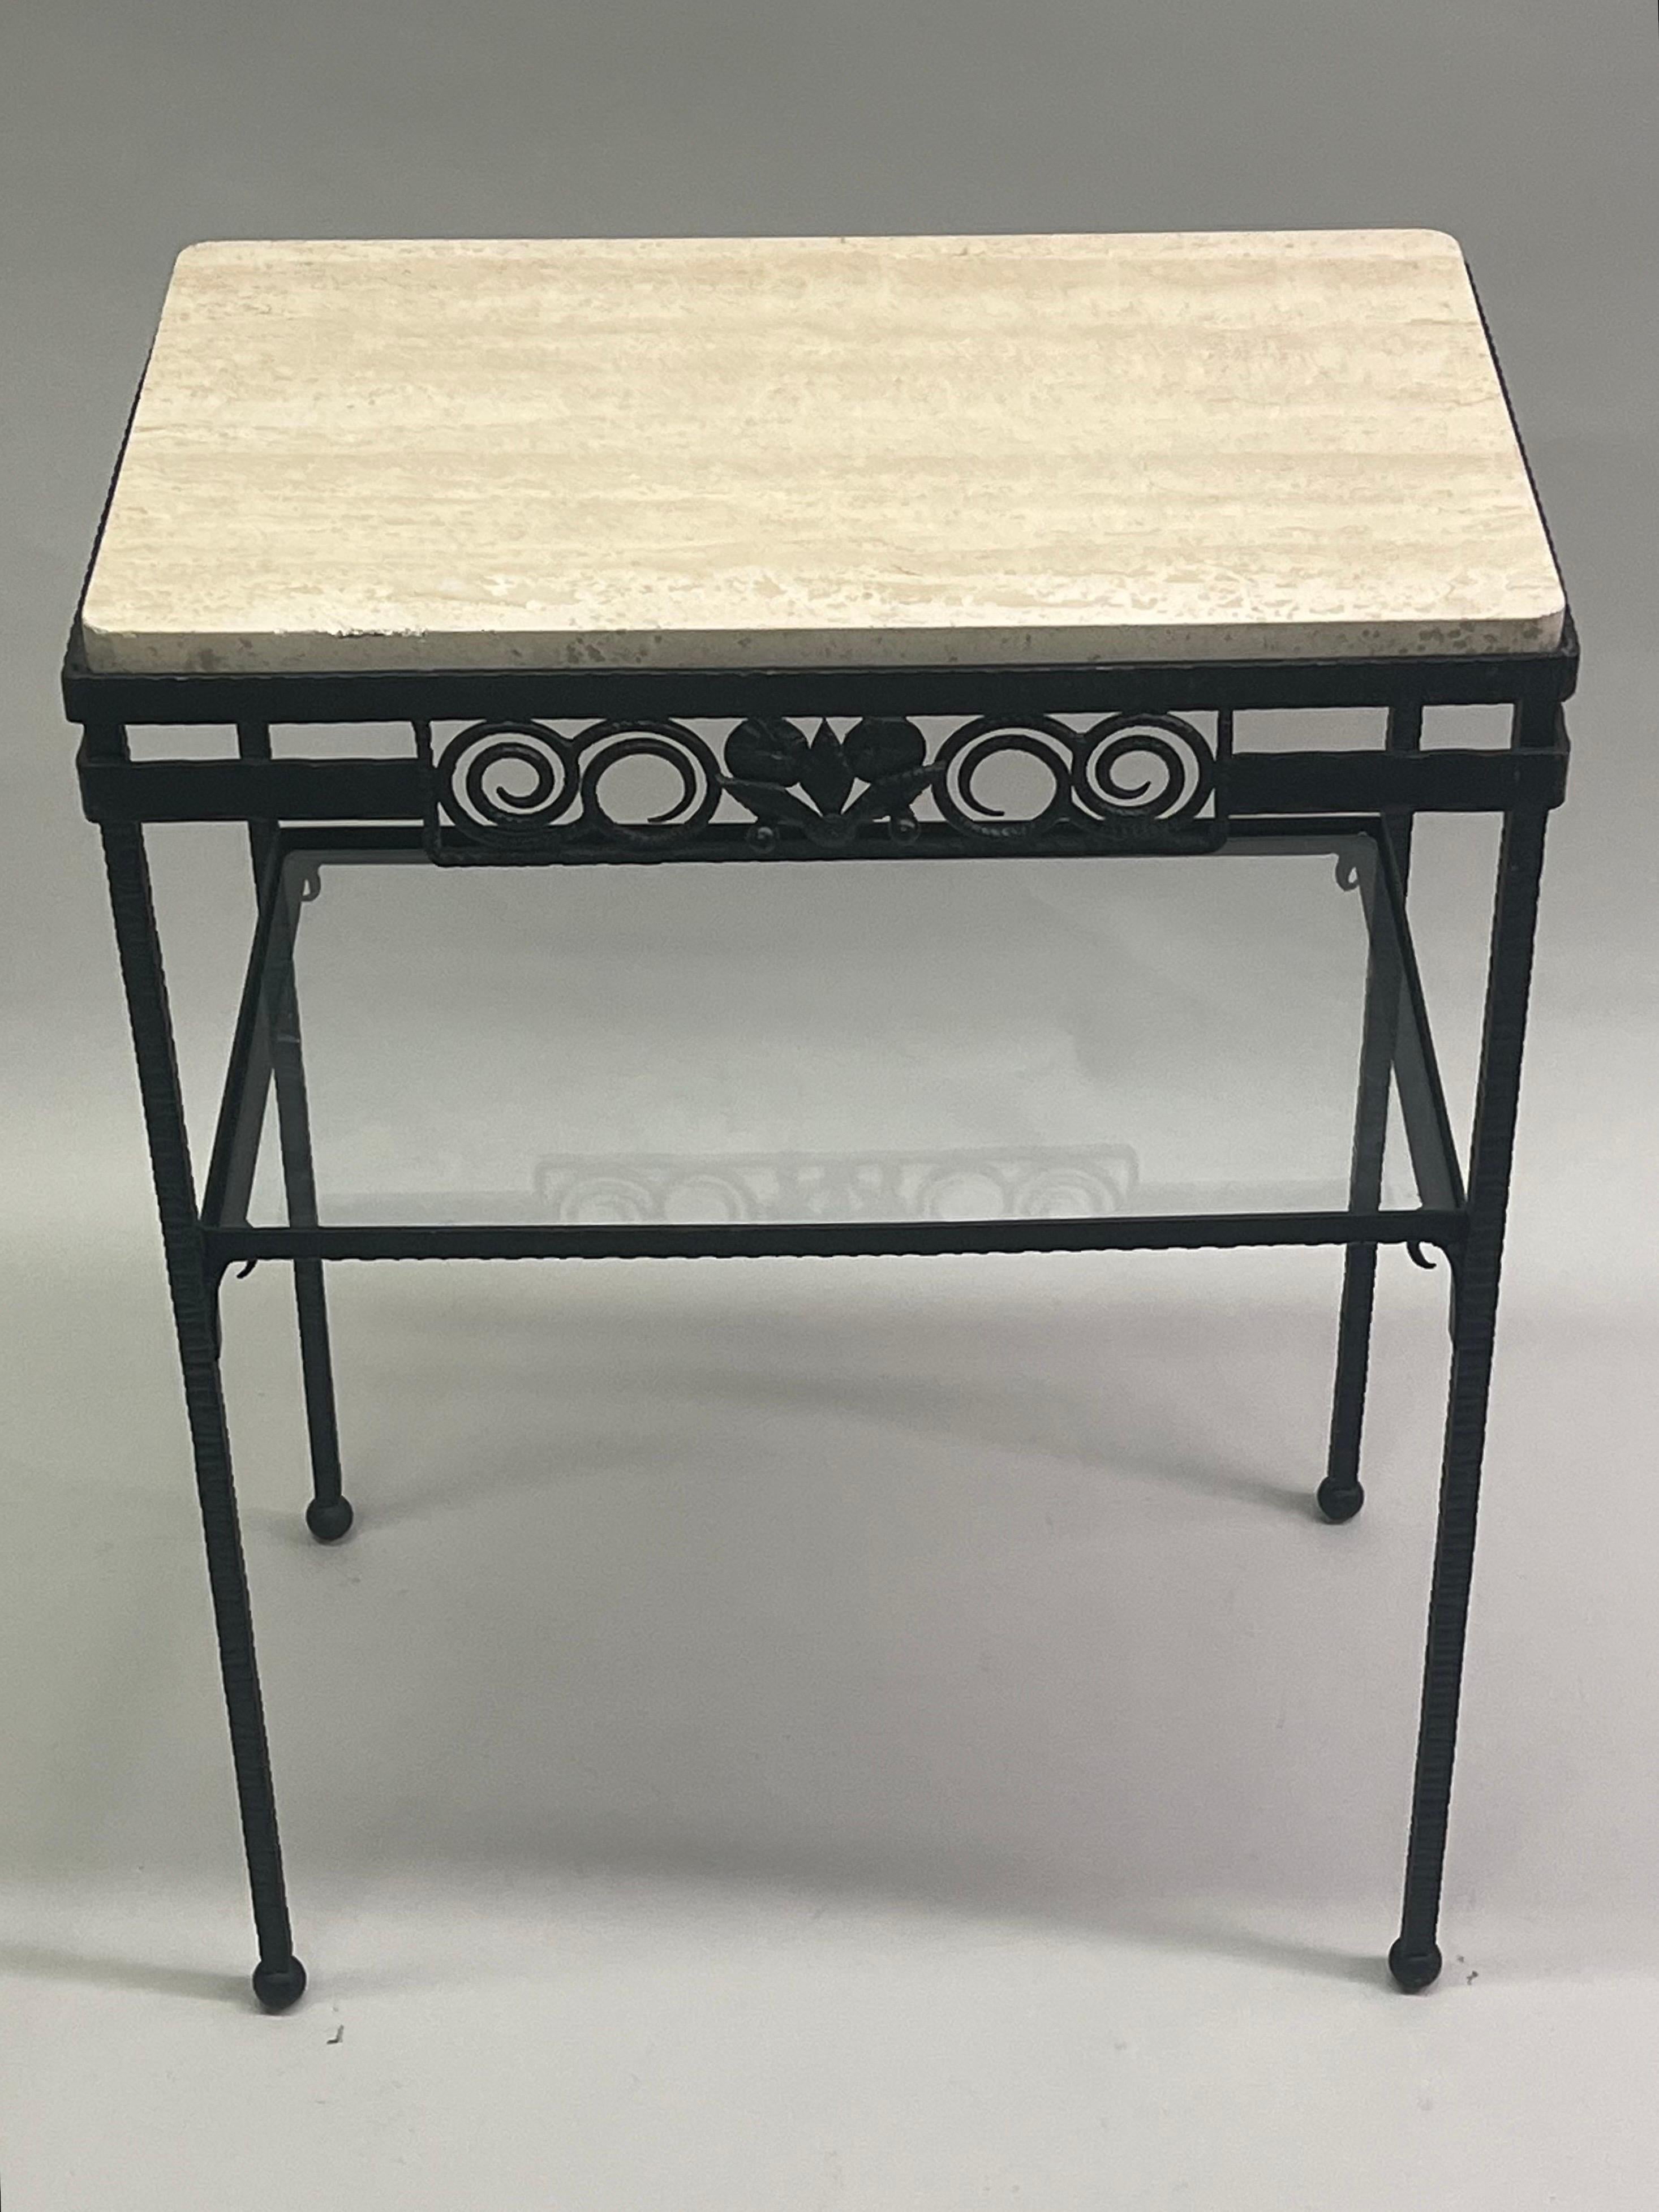 A Rare and Elegant double tier French Mid-century / Art Deco console, side table or nightstand attributed to Edgar Brandt. The piece is composed of hand-hammered wrought iron with a top of travertine and lower level of glass. The table is a work of